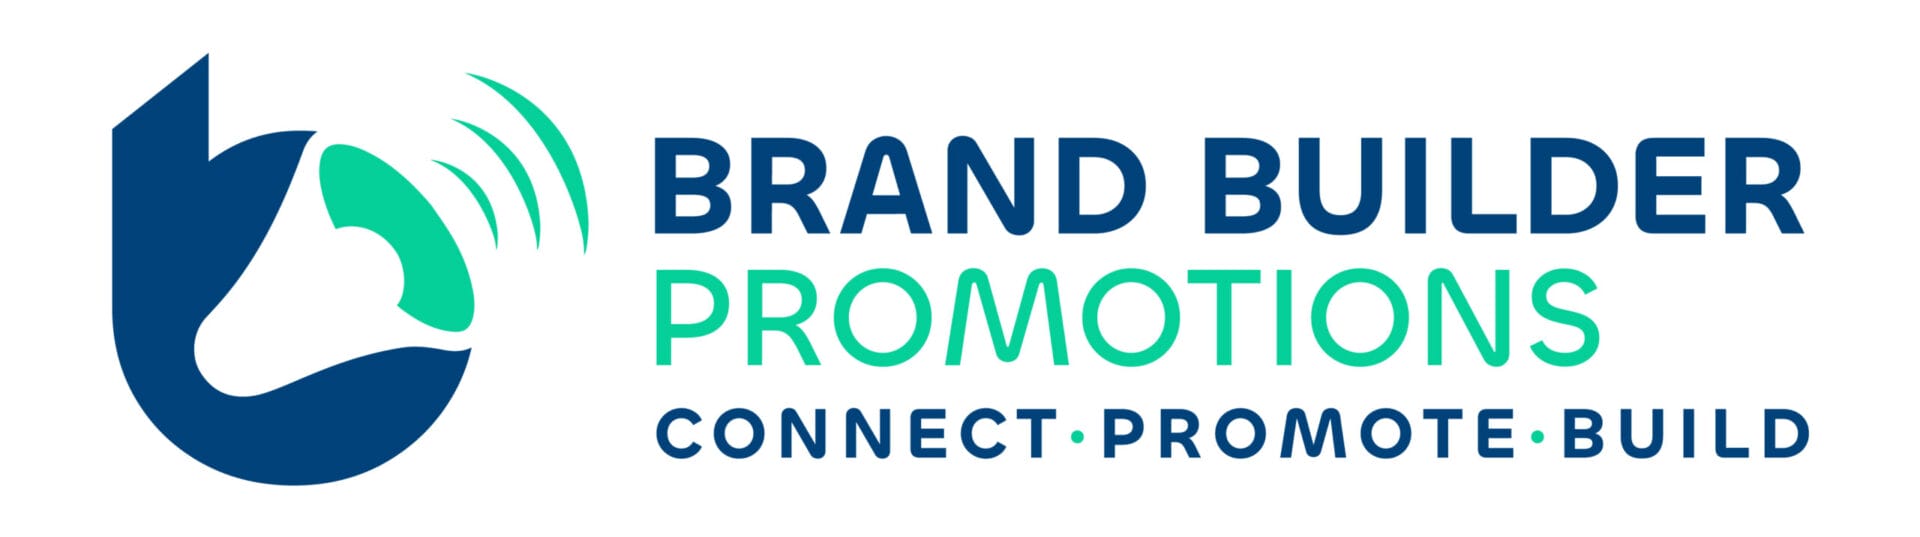 The Brand Builder Promotions Logo